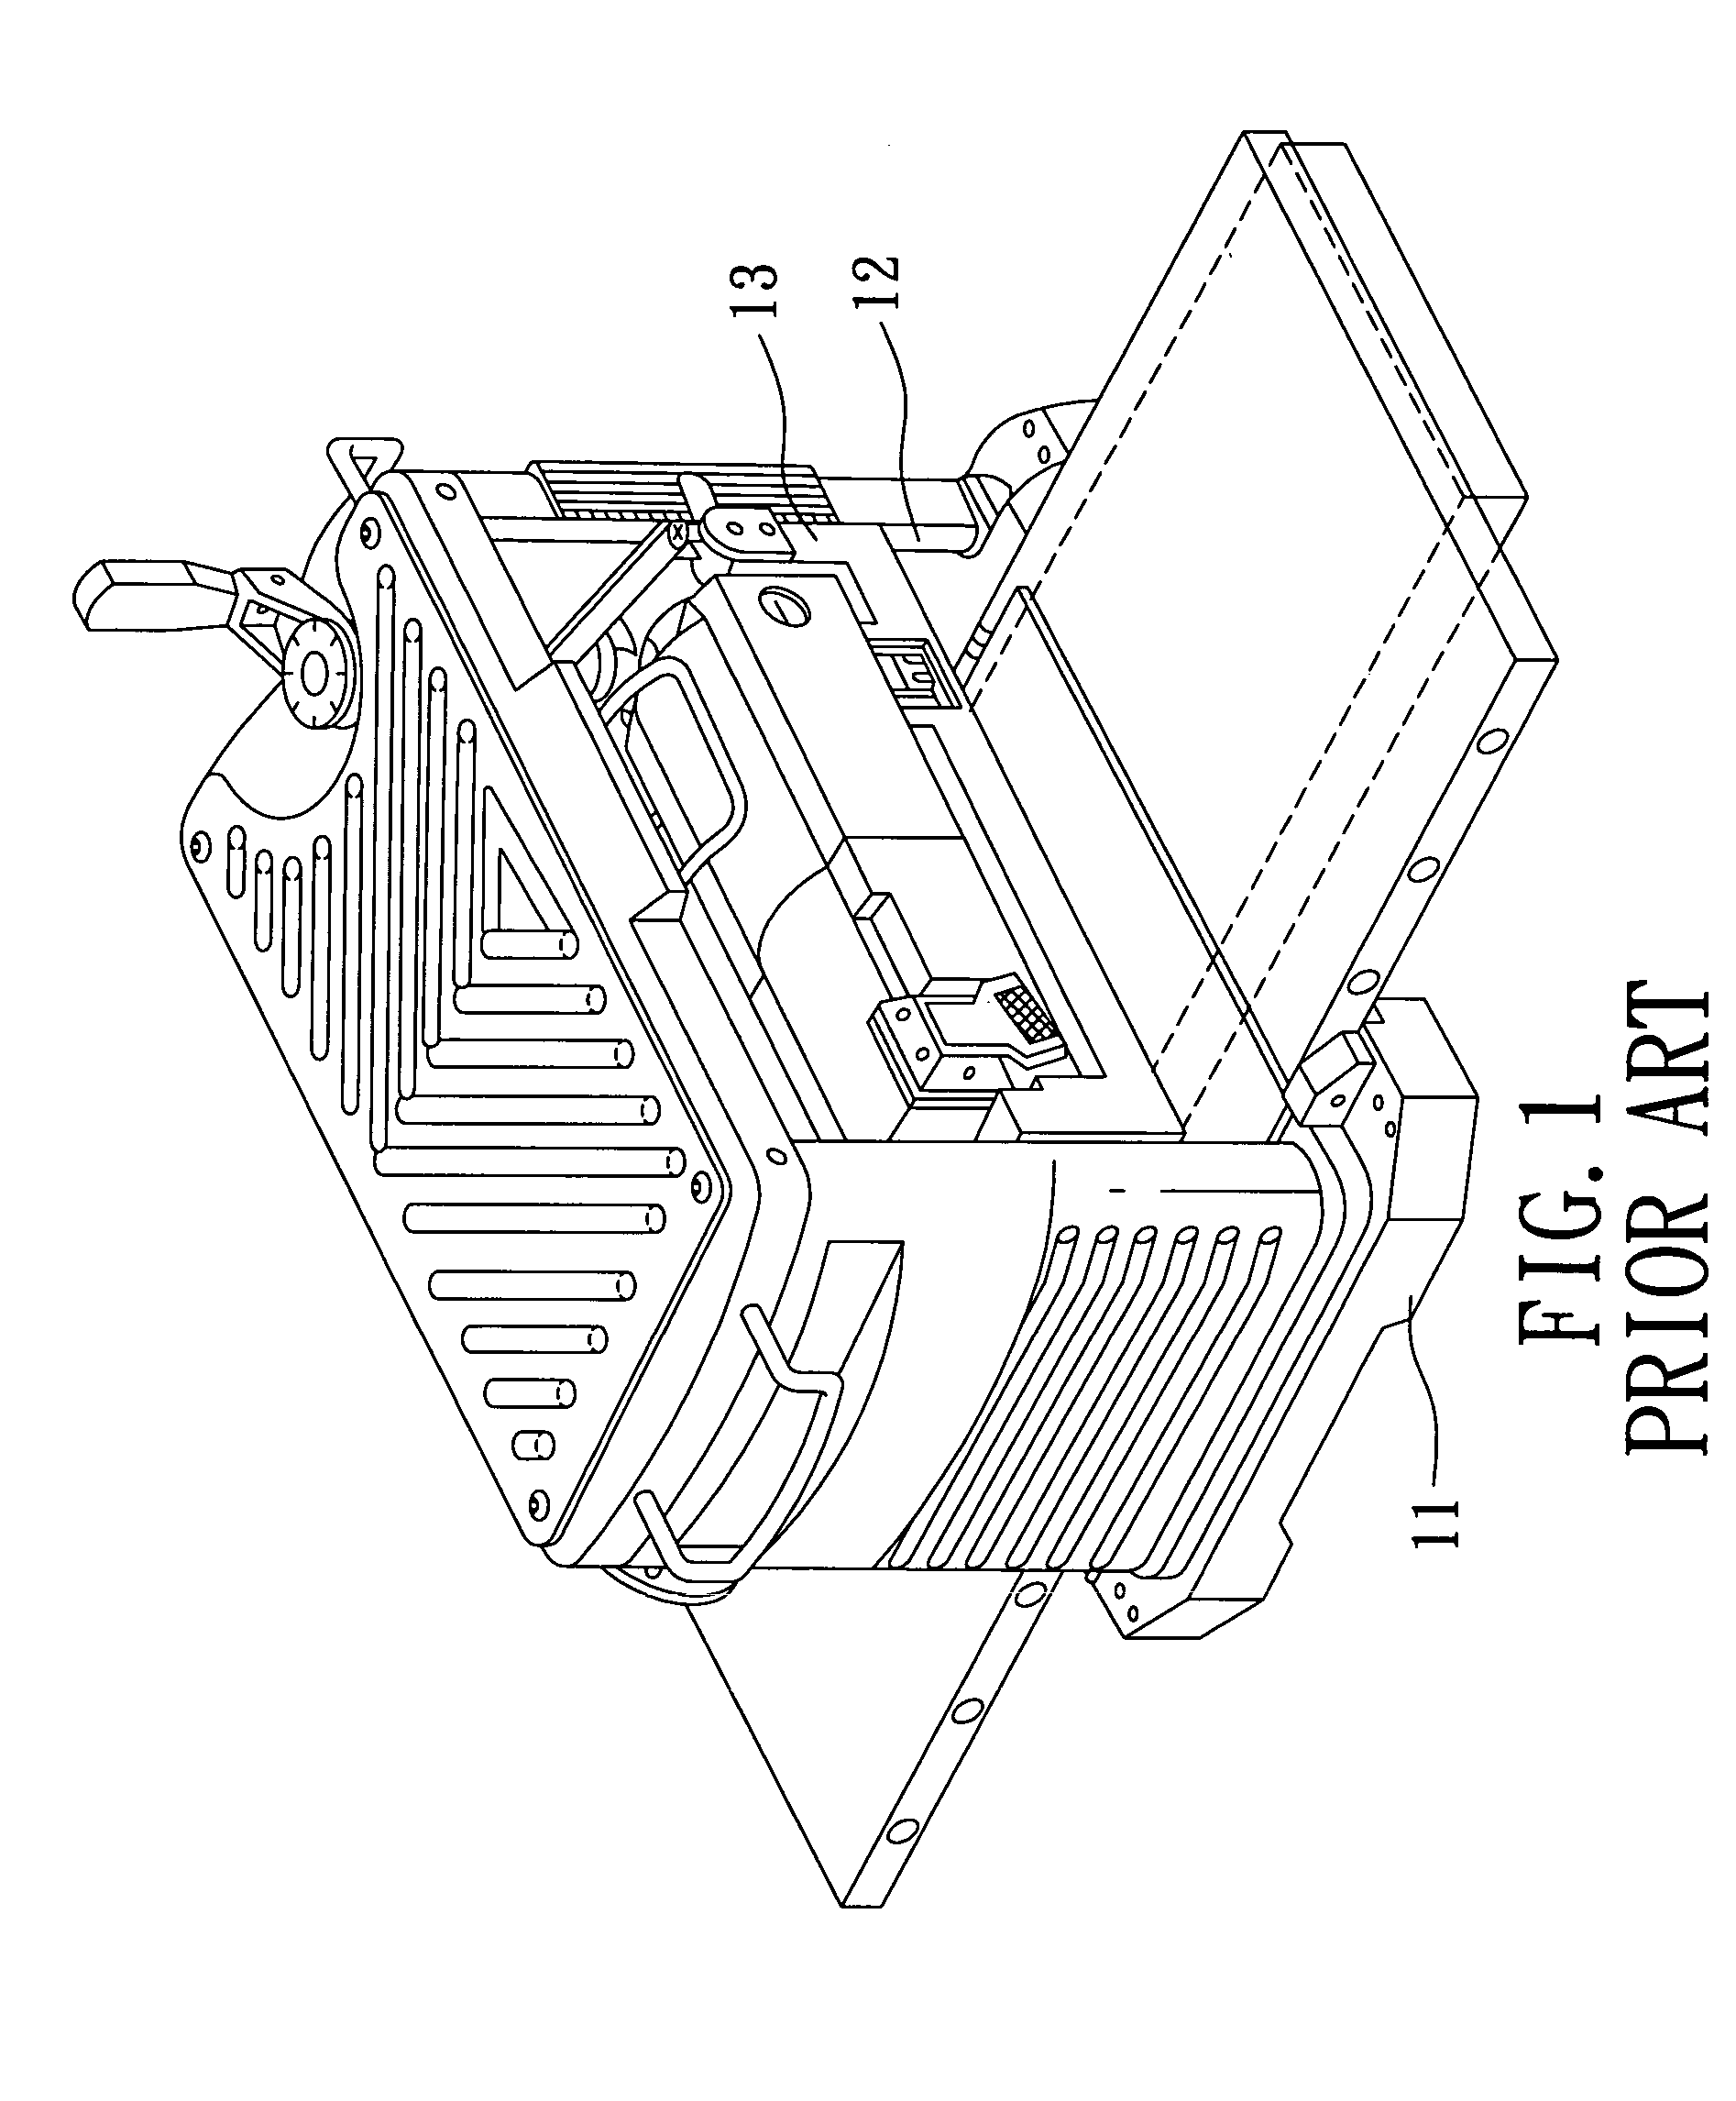 Rotary cutter for a wood planing machine